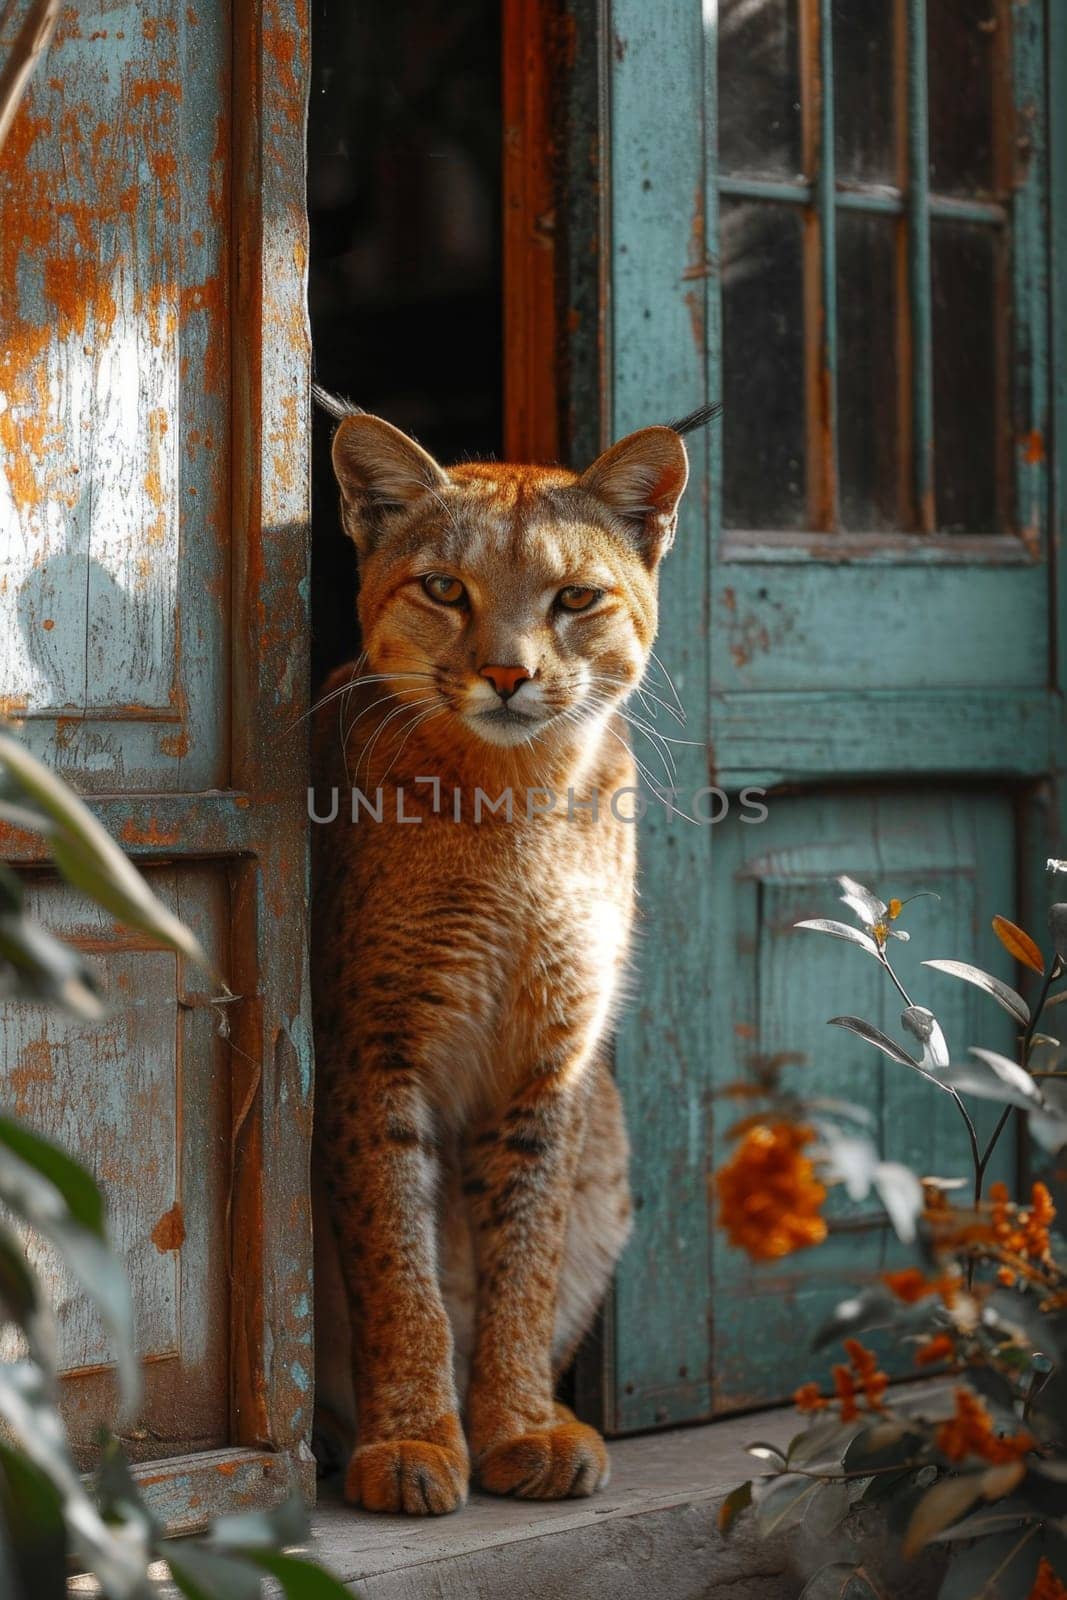 A cute cat was sitting near the door guarding the entrance by Lobachad